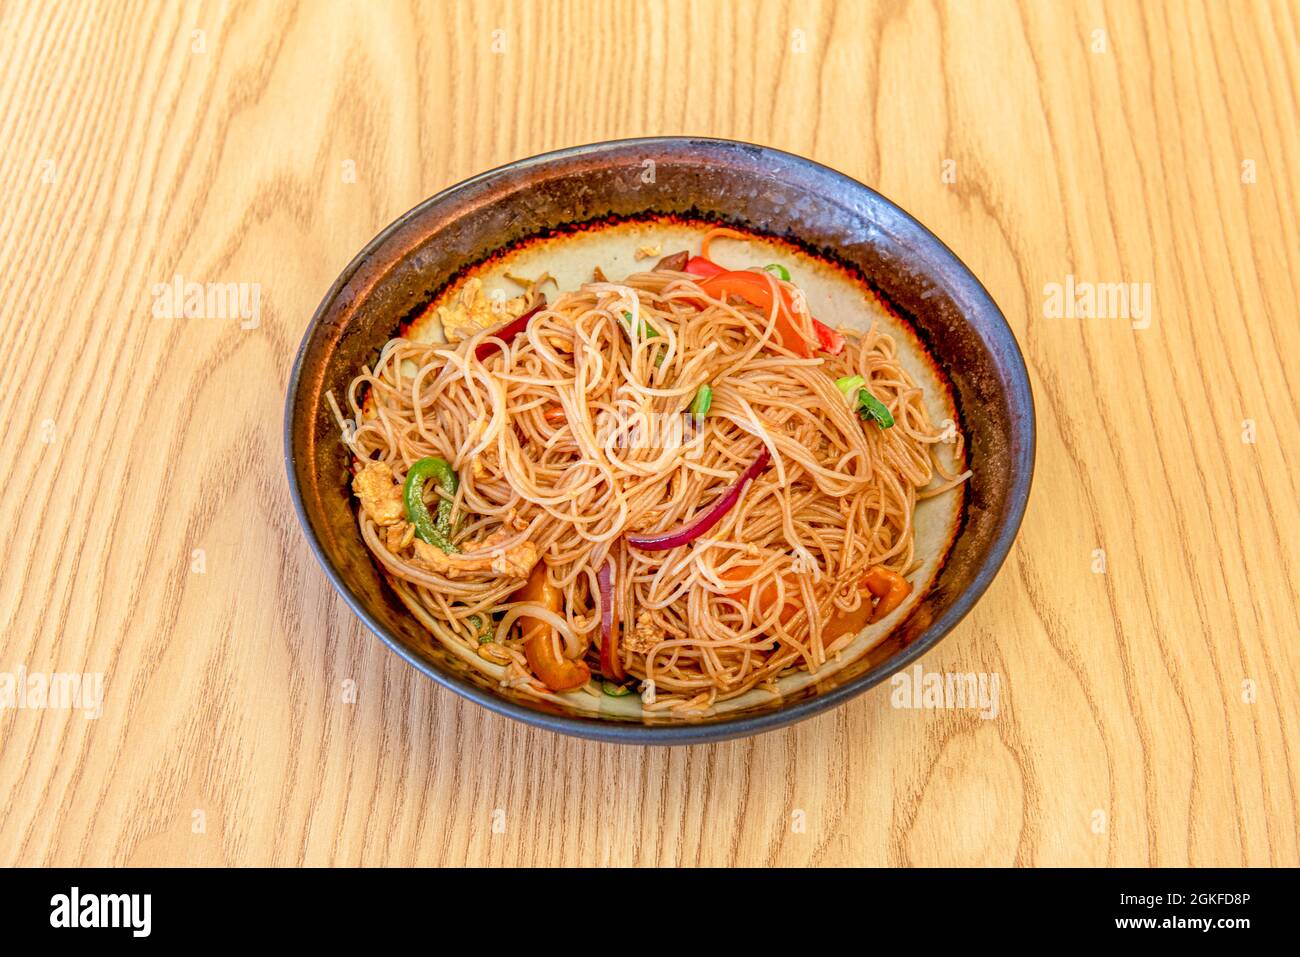 nice bowl of rice noodles with wok-sautéed vegetables, chicken pieces and  red onion on light wooden table Stock Photo - Alamy